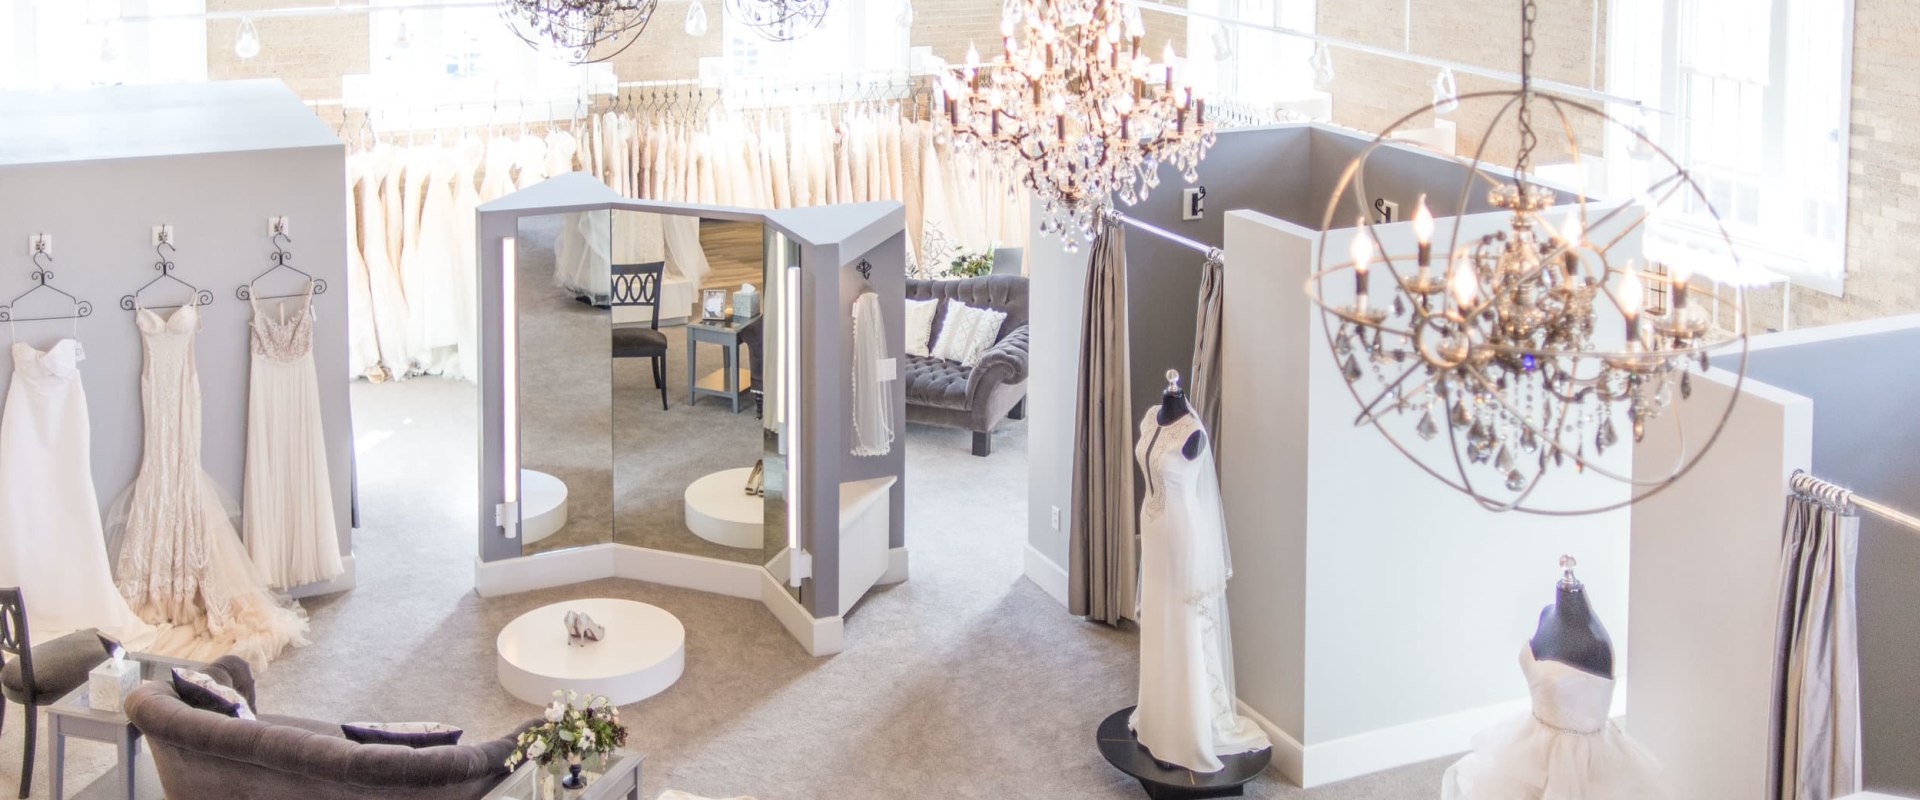 Boutique Salons in Denver, CO: The Perfect Choice for Bridal and Wedding Packages